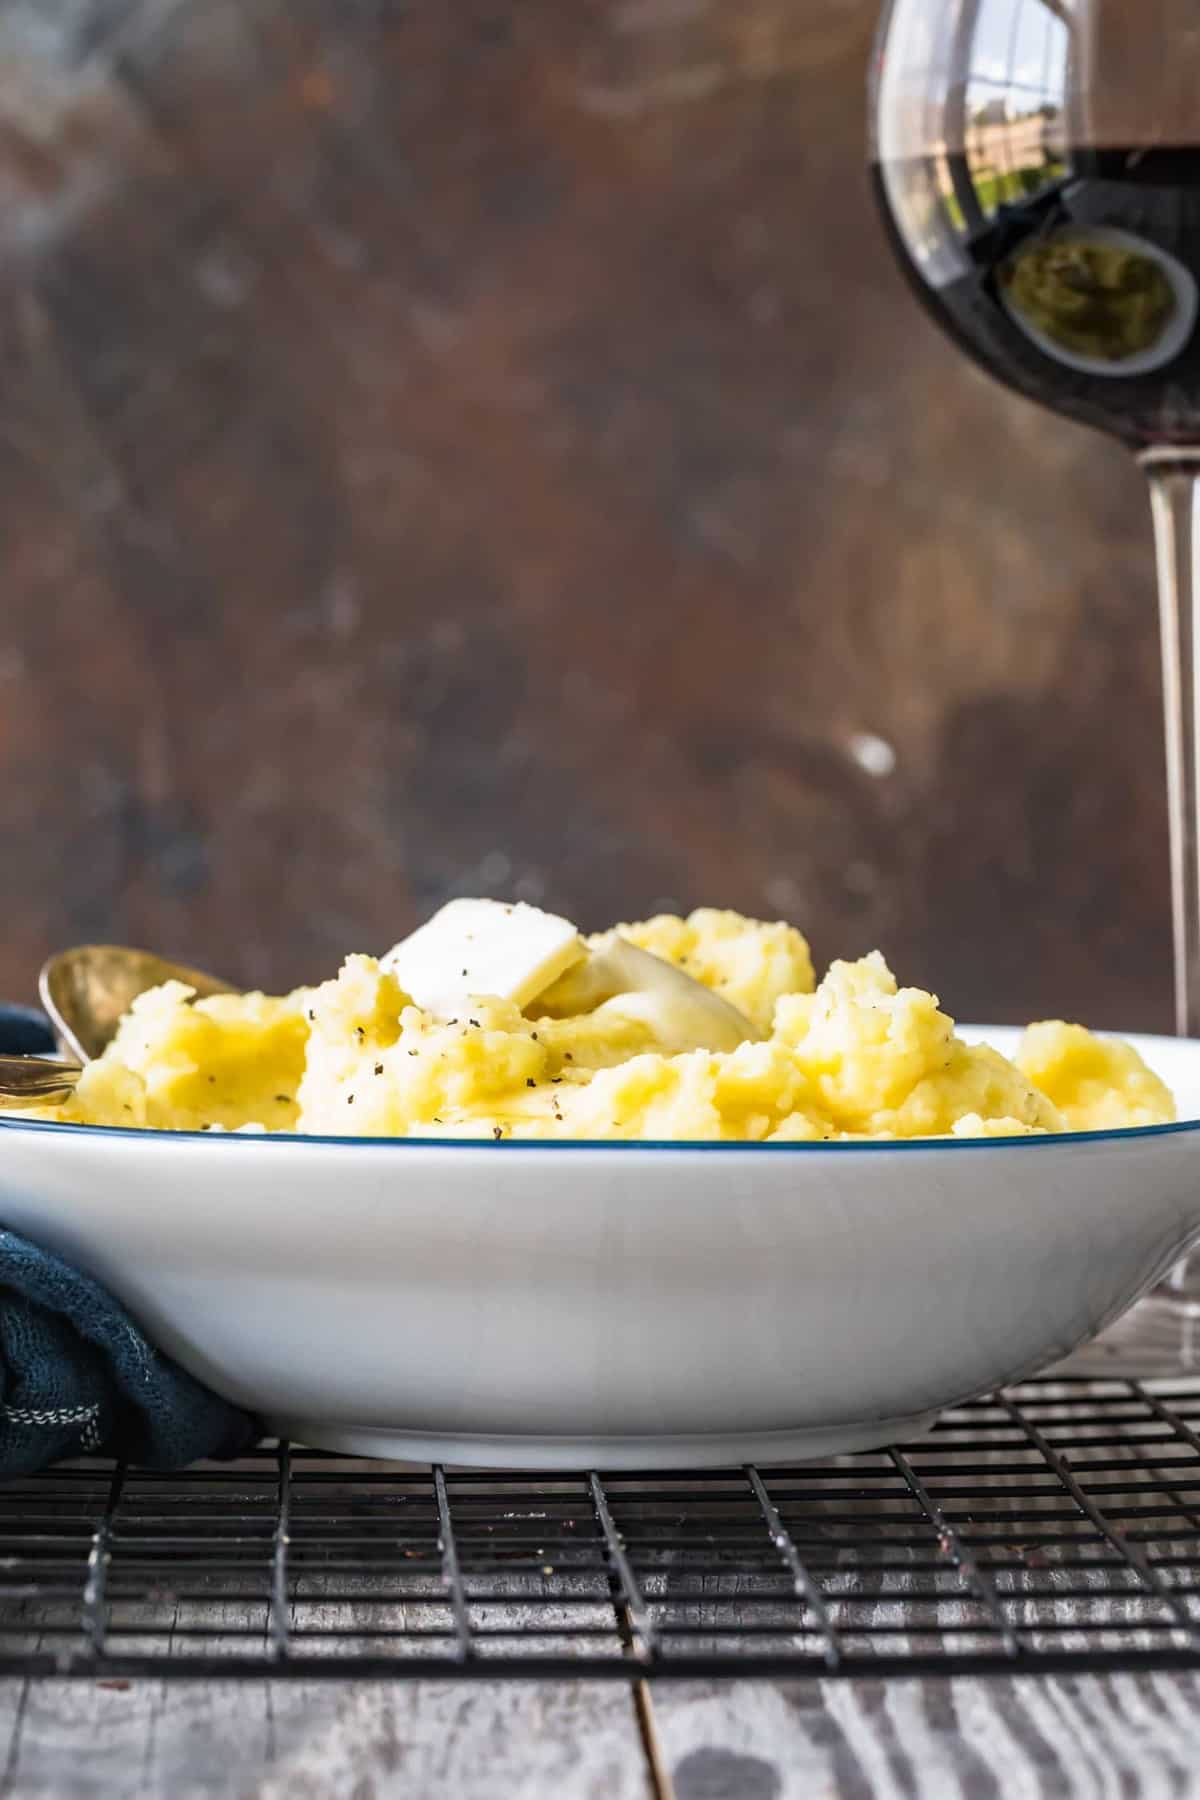 Mashed Potatoes served in a white and blue bowl